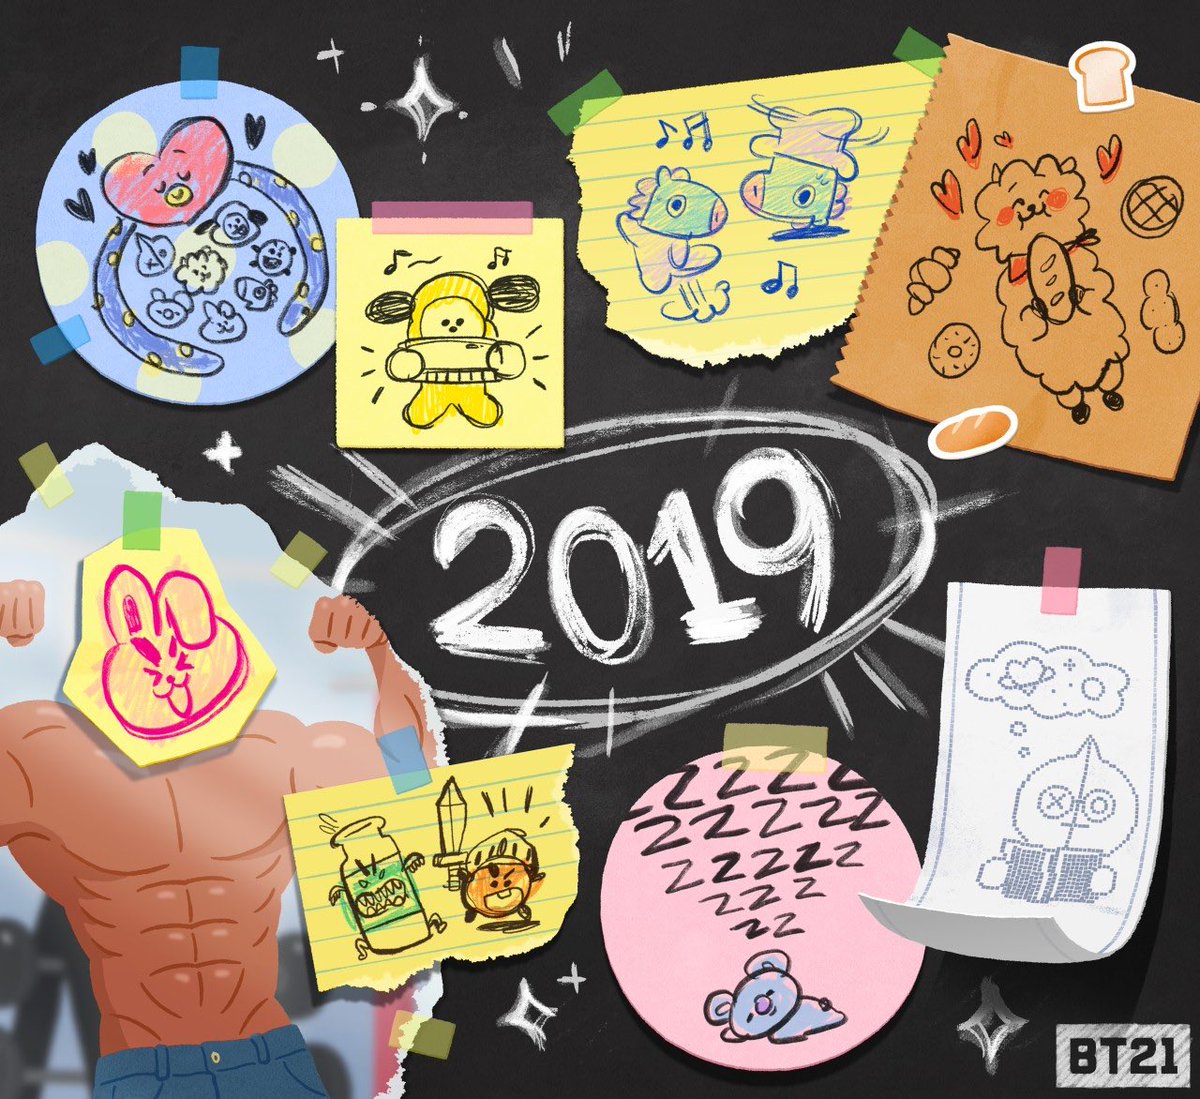 New Year, New Plan ?
#What_you_could_not_have_imagined 
#Year2019 #NewYearsResolution #BT21 